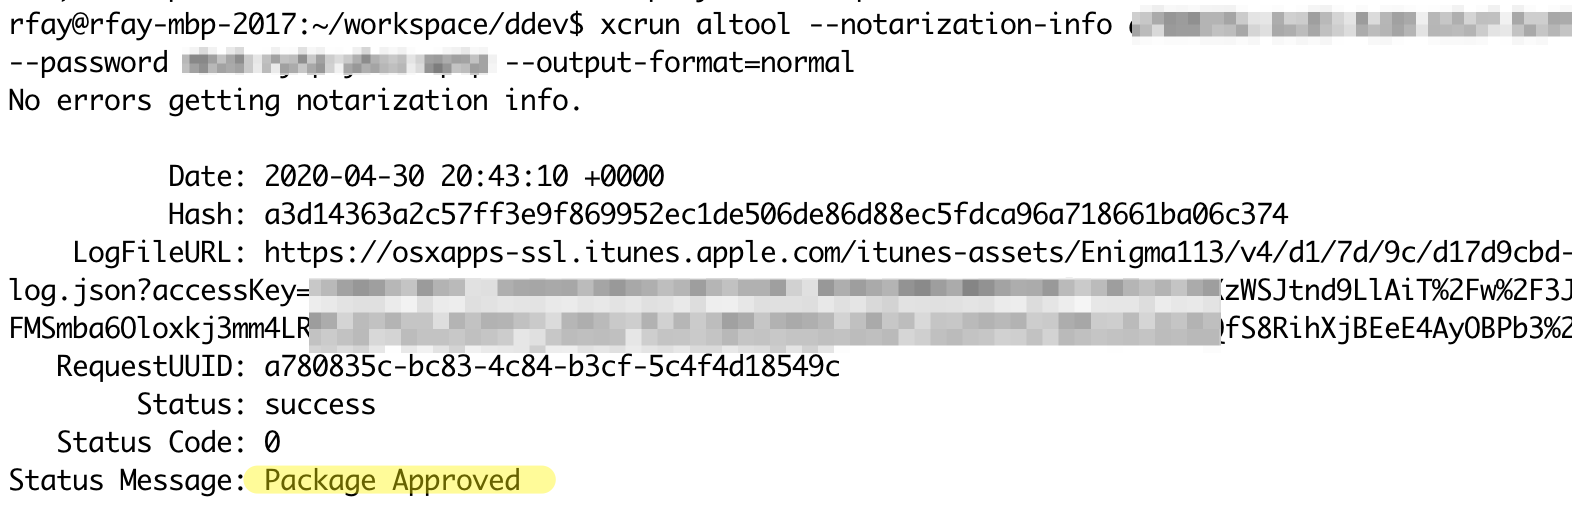 Partially-redacted terminal screenshot of macOS signing process, with emphasis on “Package Approved”